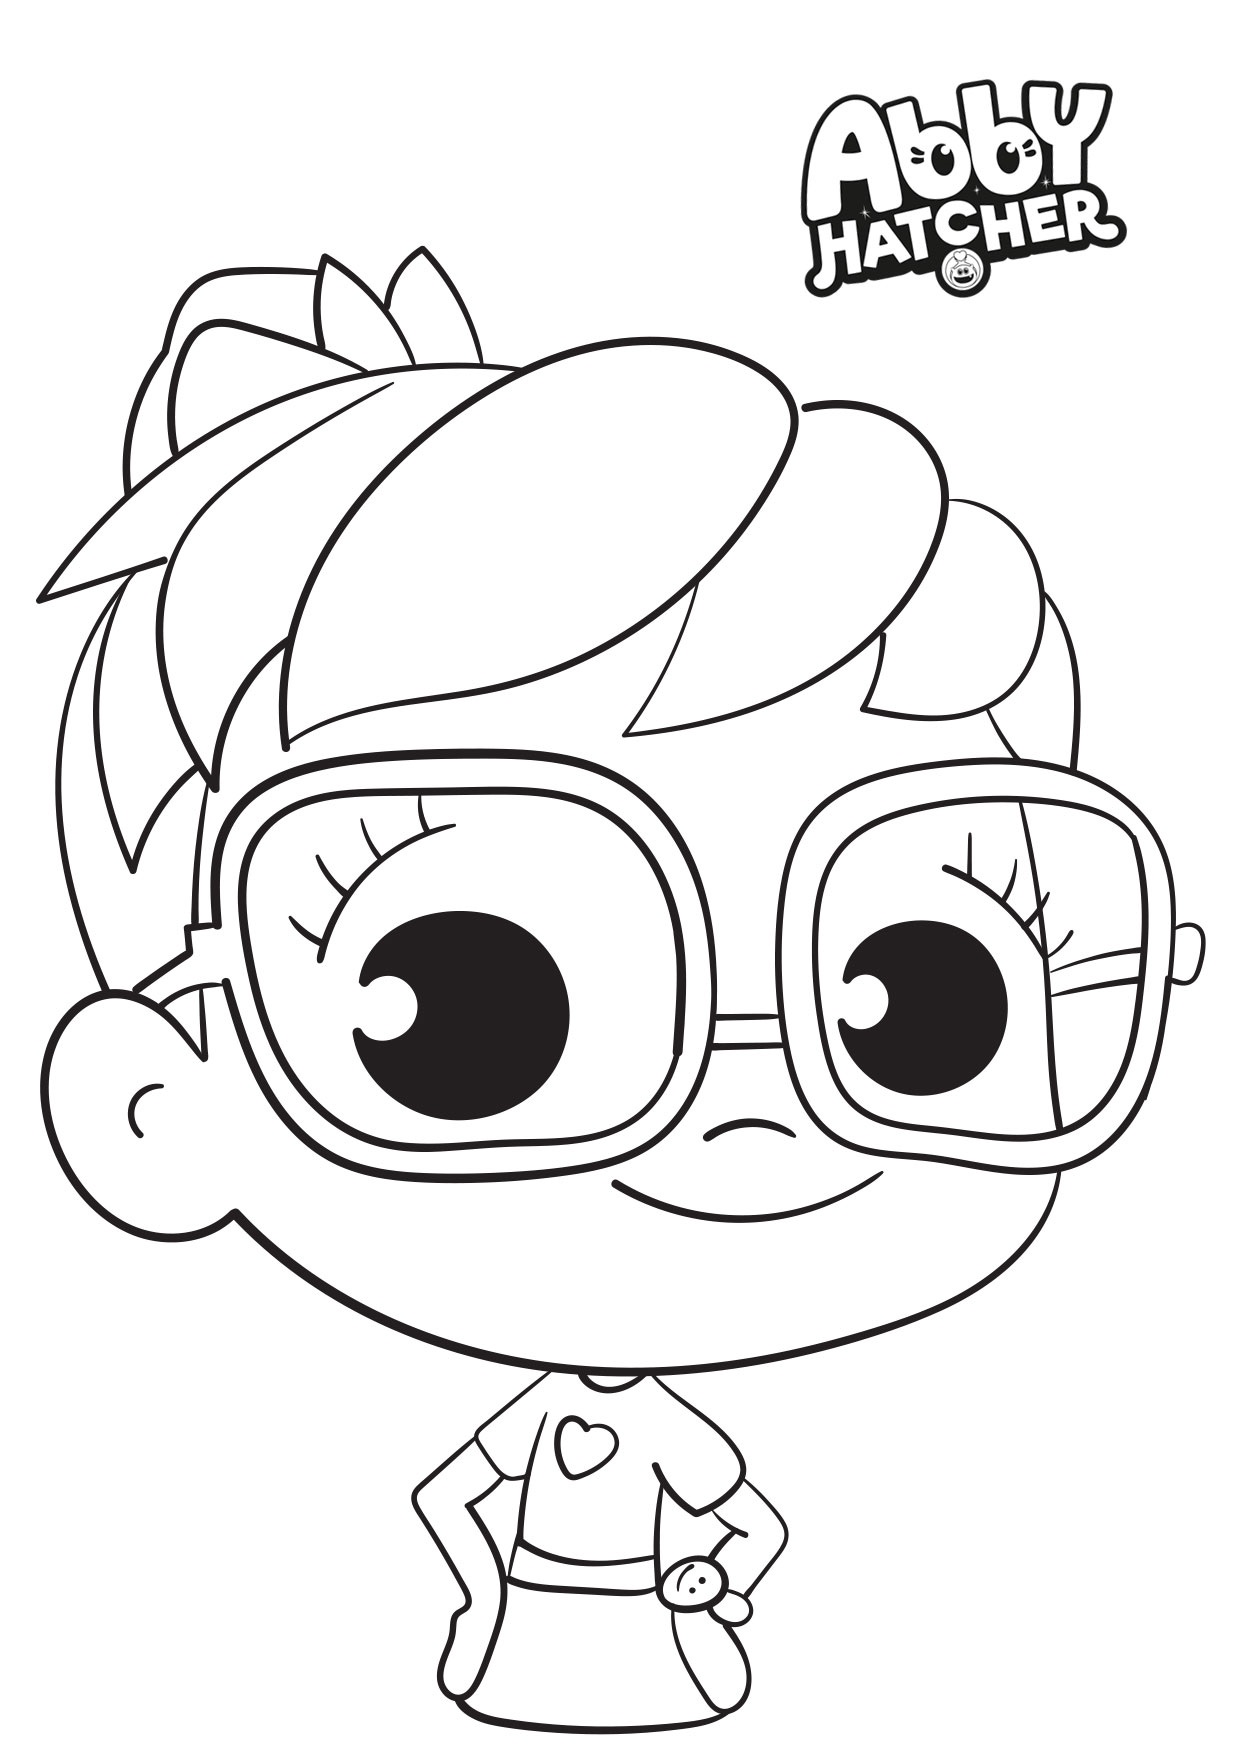 abby-hatcher-abby-hatcher-coloring-pages-coloring-pages-for-kids